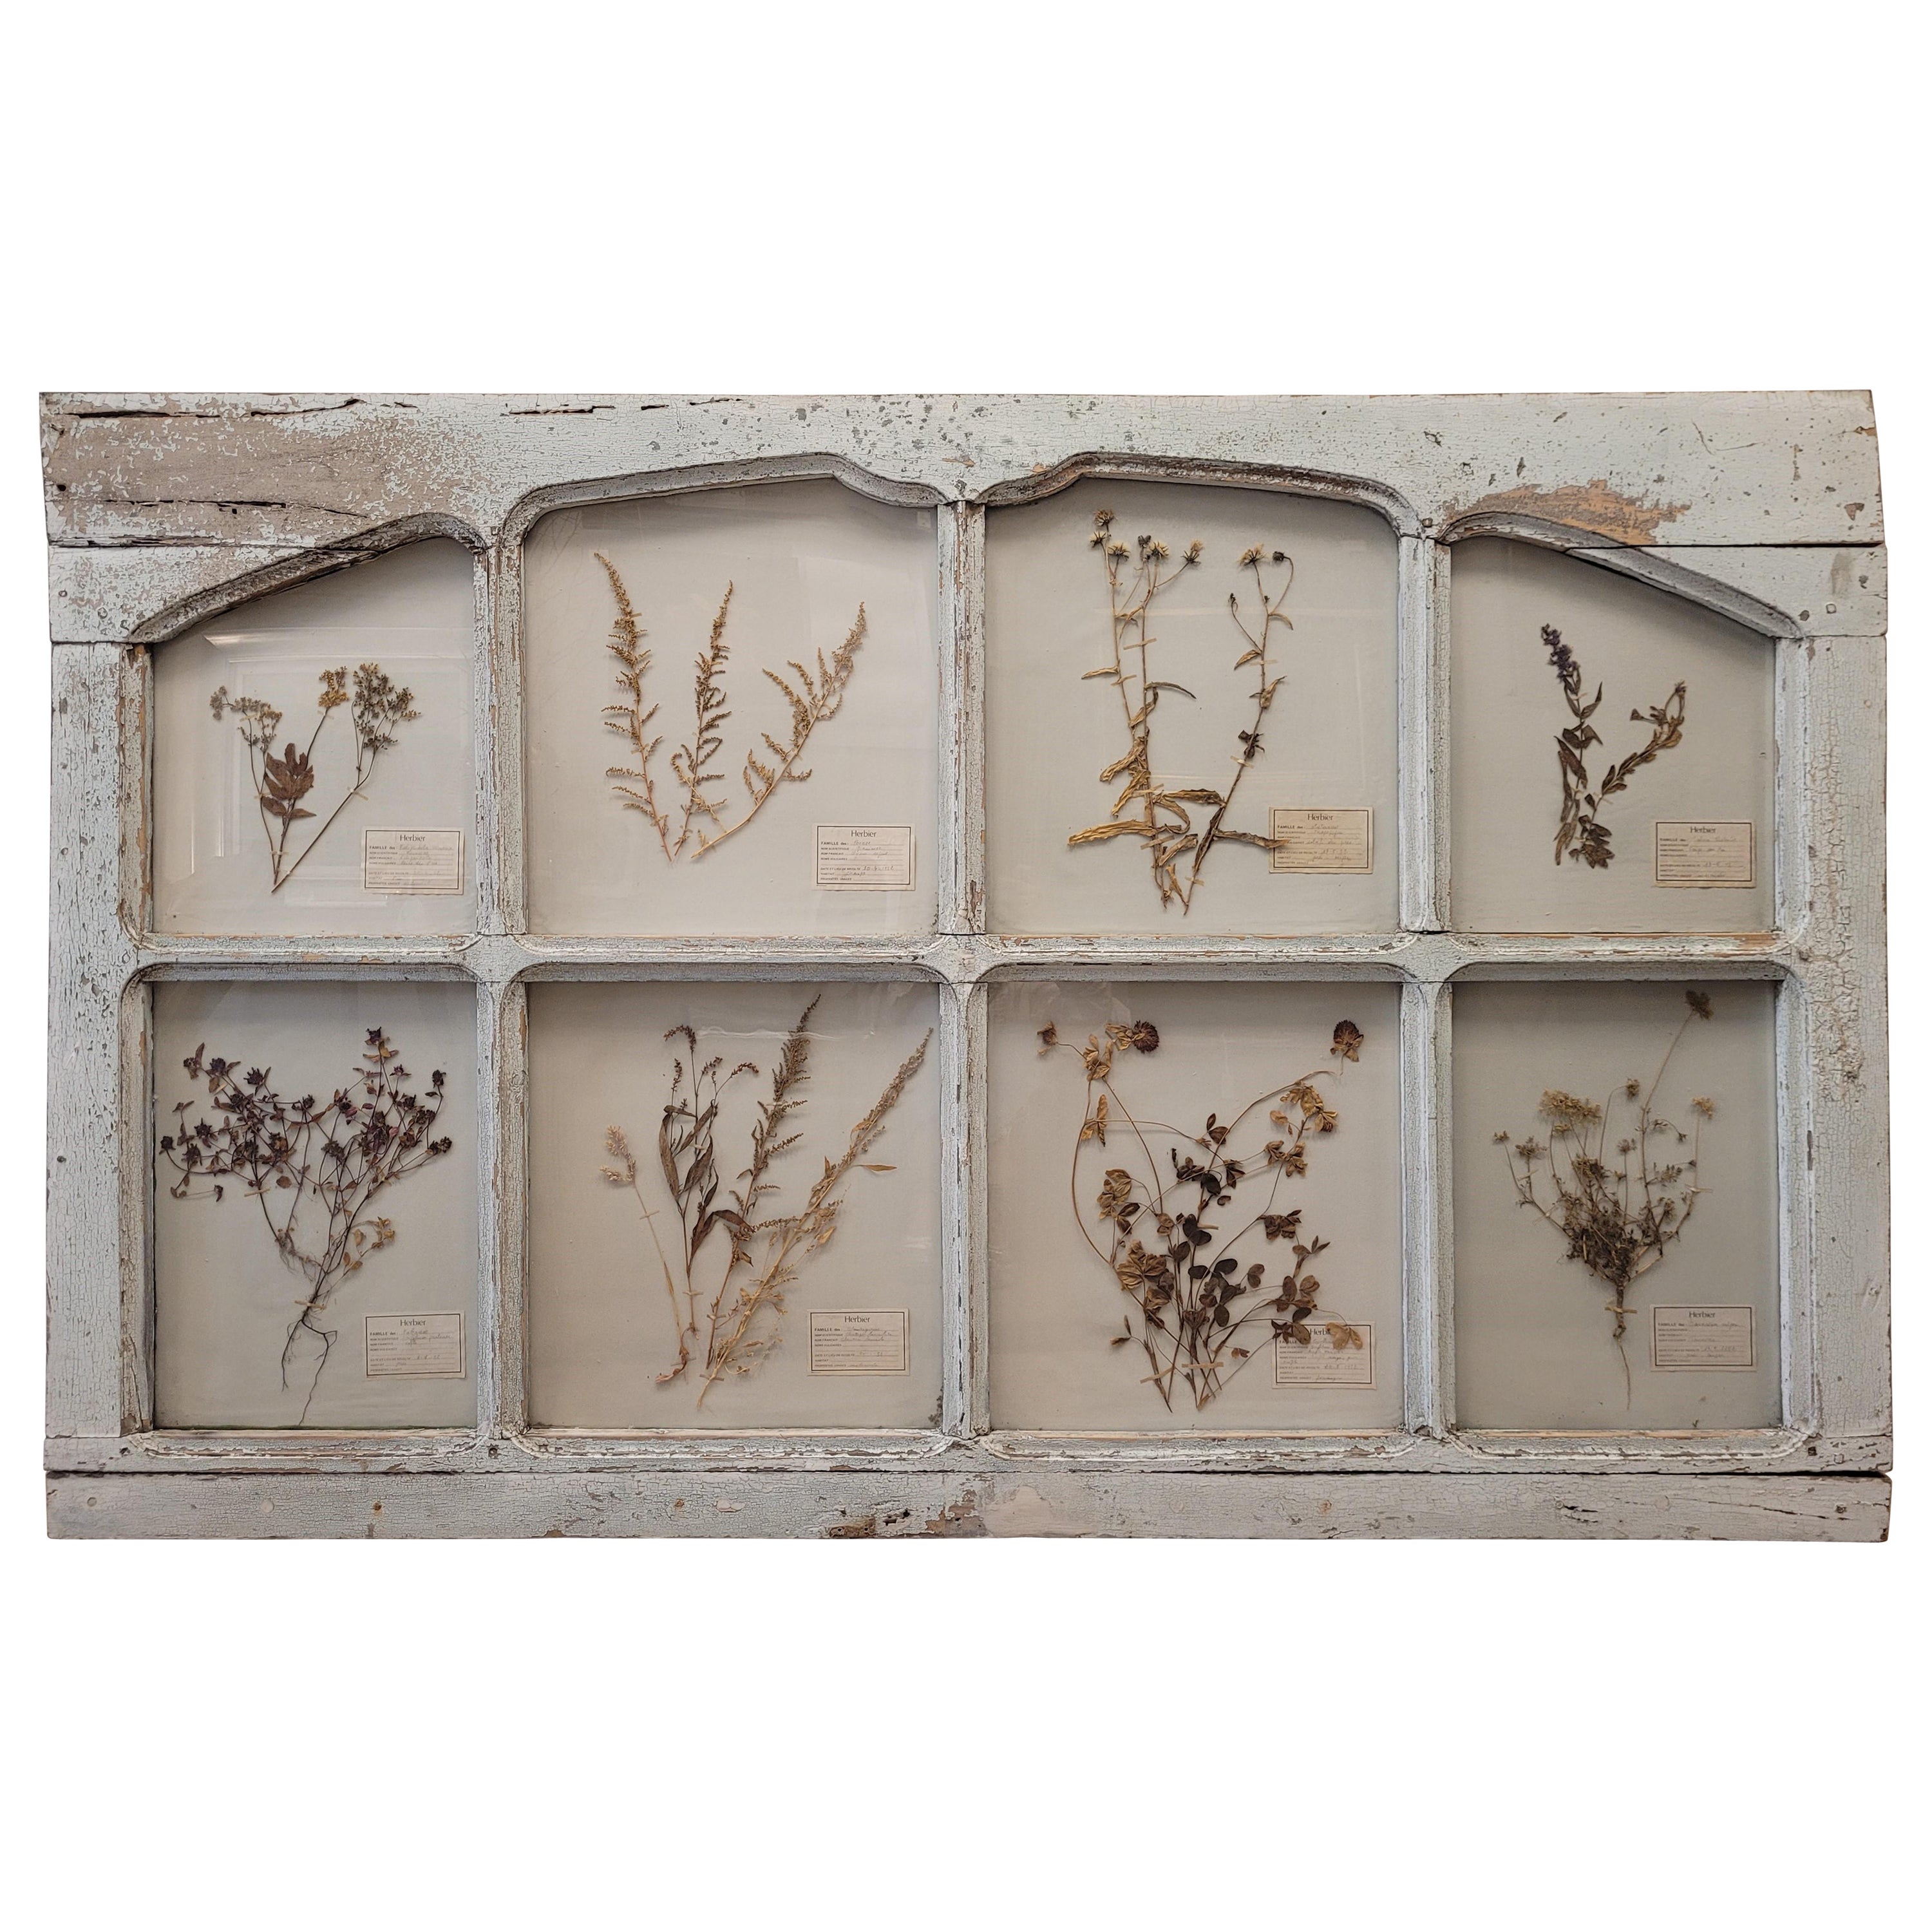 Antique French Door in Provençal blue with herbalist or pressed flowers For Sale